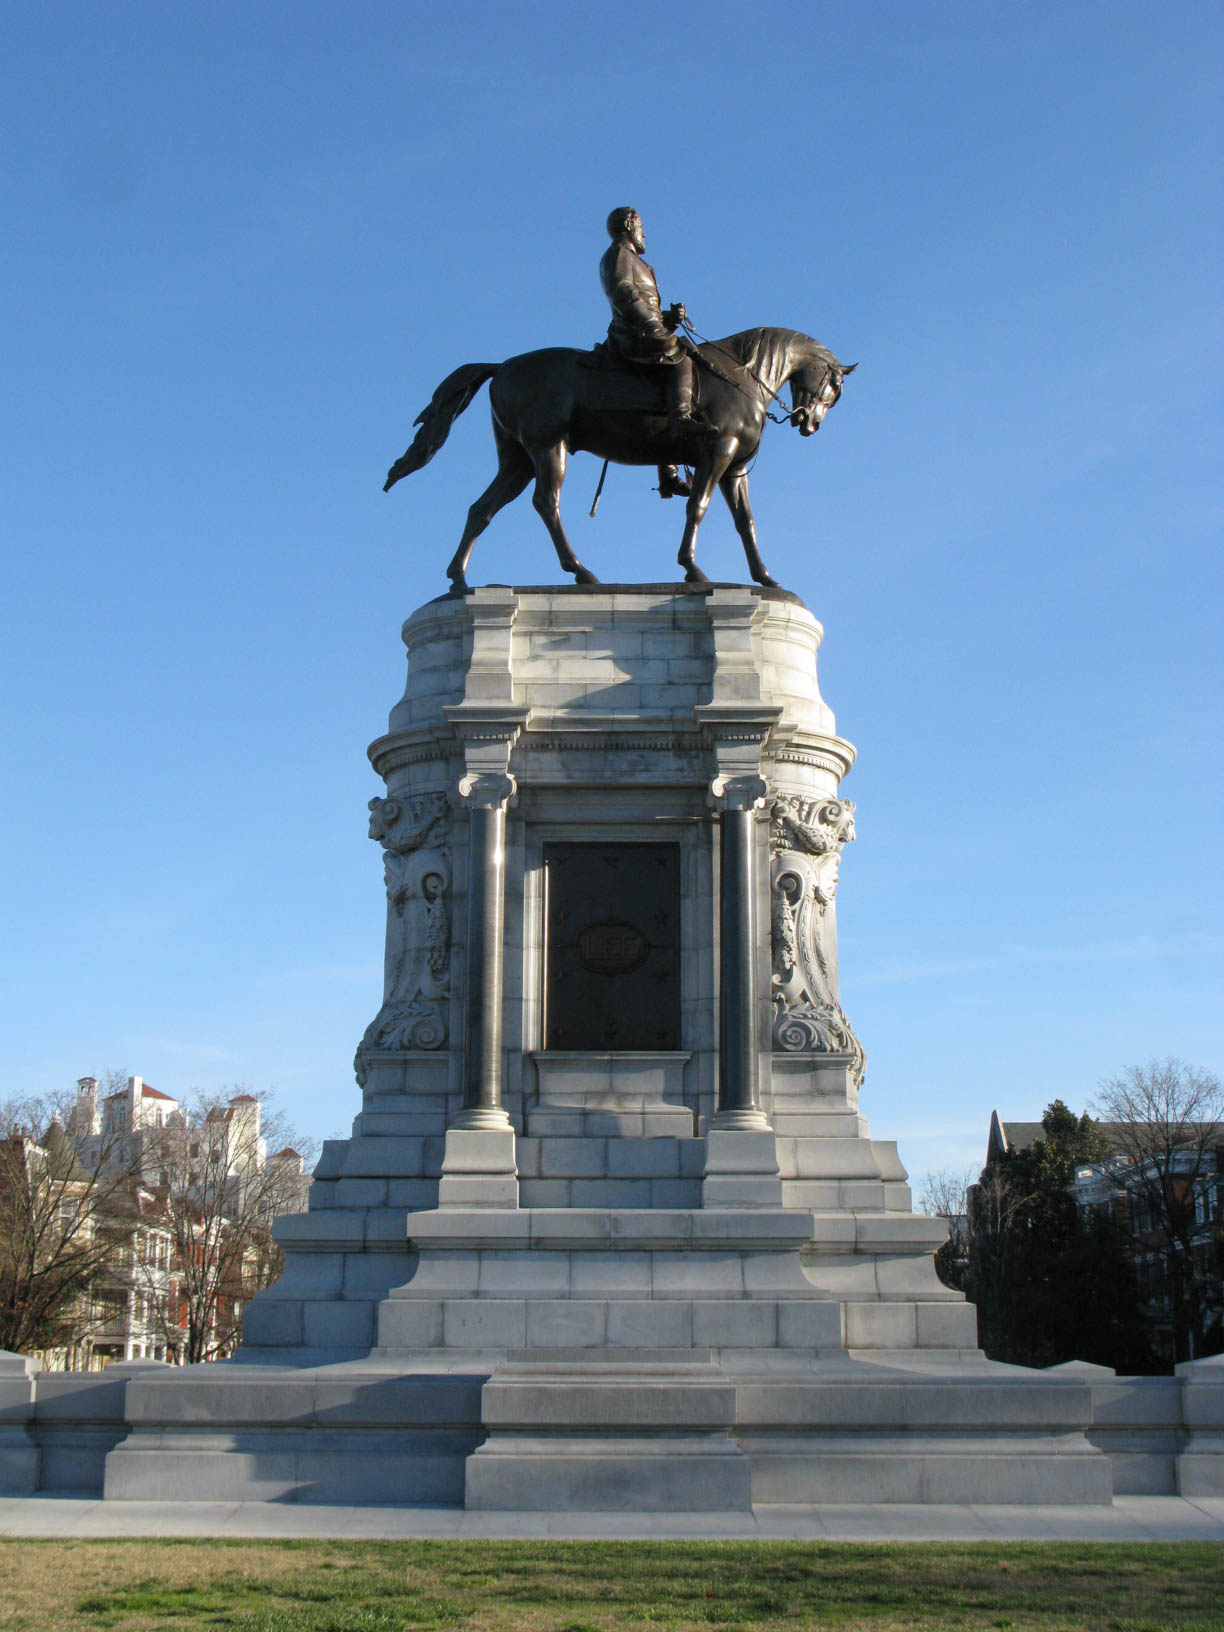 This statue on Richmond's Monument Avenue shows Robert E. Lee astride his horse Traveller.